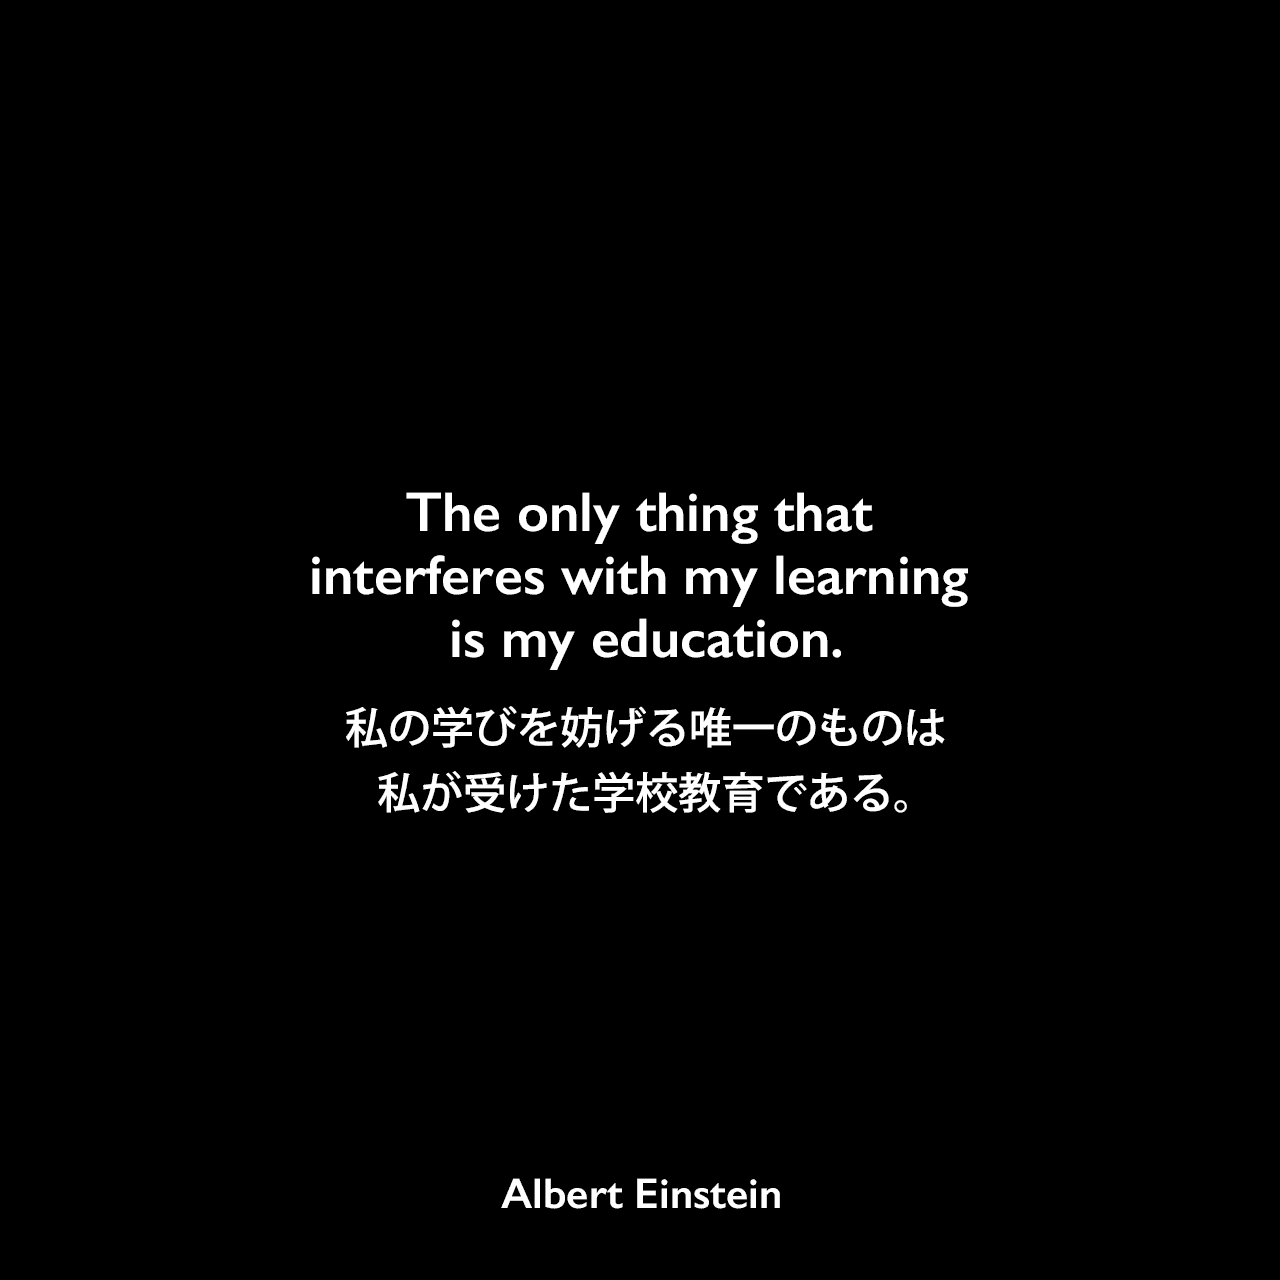 The only thing that interferes with my learning is my education.私の学びを妨げる唯一のものは私が受けた学校教育である。Albert Einstein